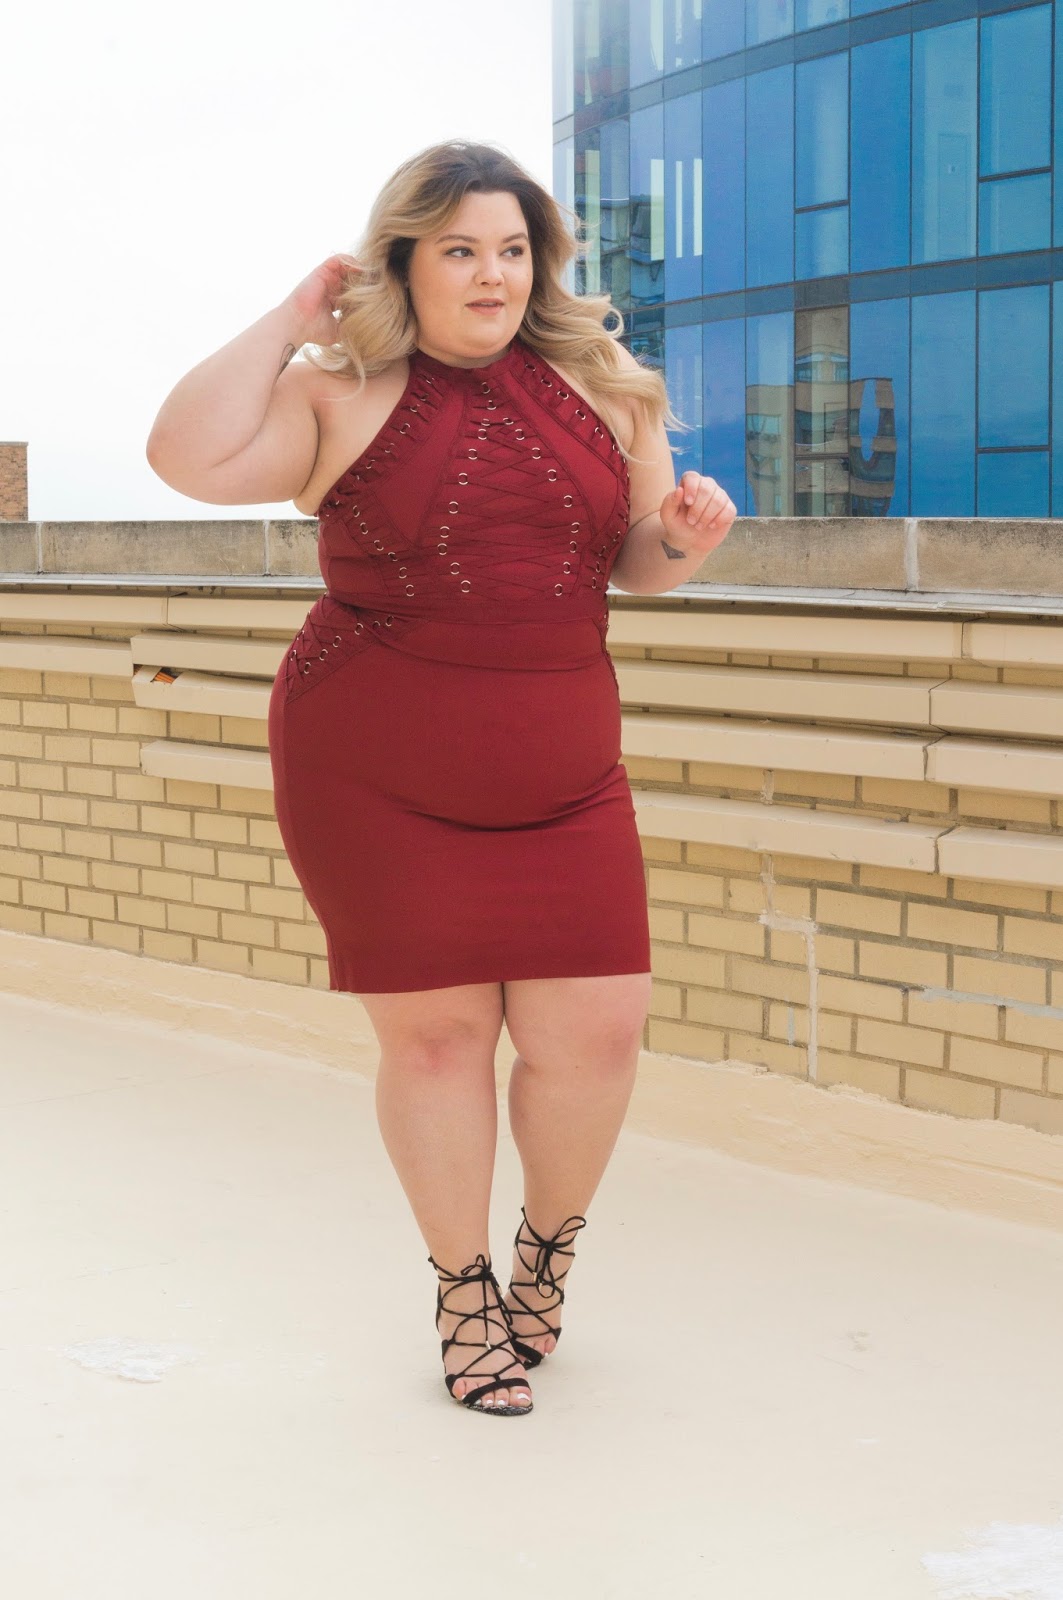 natalie craig, natalie in the city, Chicago plus size fashion blogger, fashion blogger, outfit review, fashion nova, fashion nova curve, Chicago plus size model, plus size body con dress, plus size bandage dress, lace up trend, affordable plus size fashion, off your beauty standards, embrace my curves, plus model mag, skorch magazine